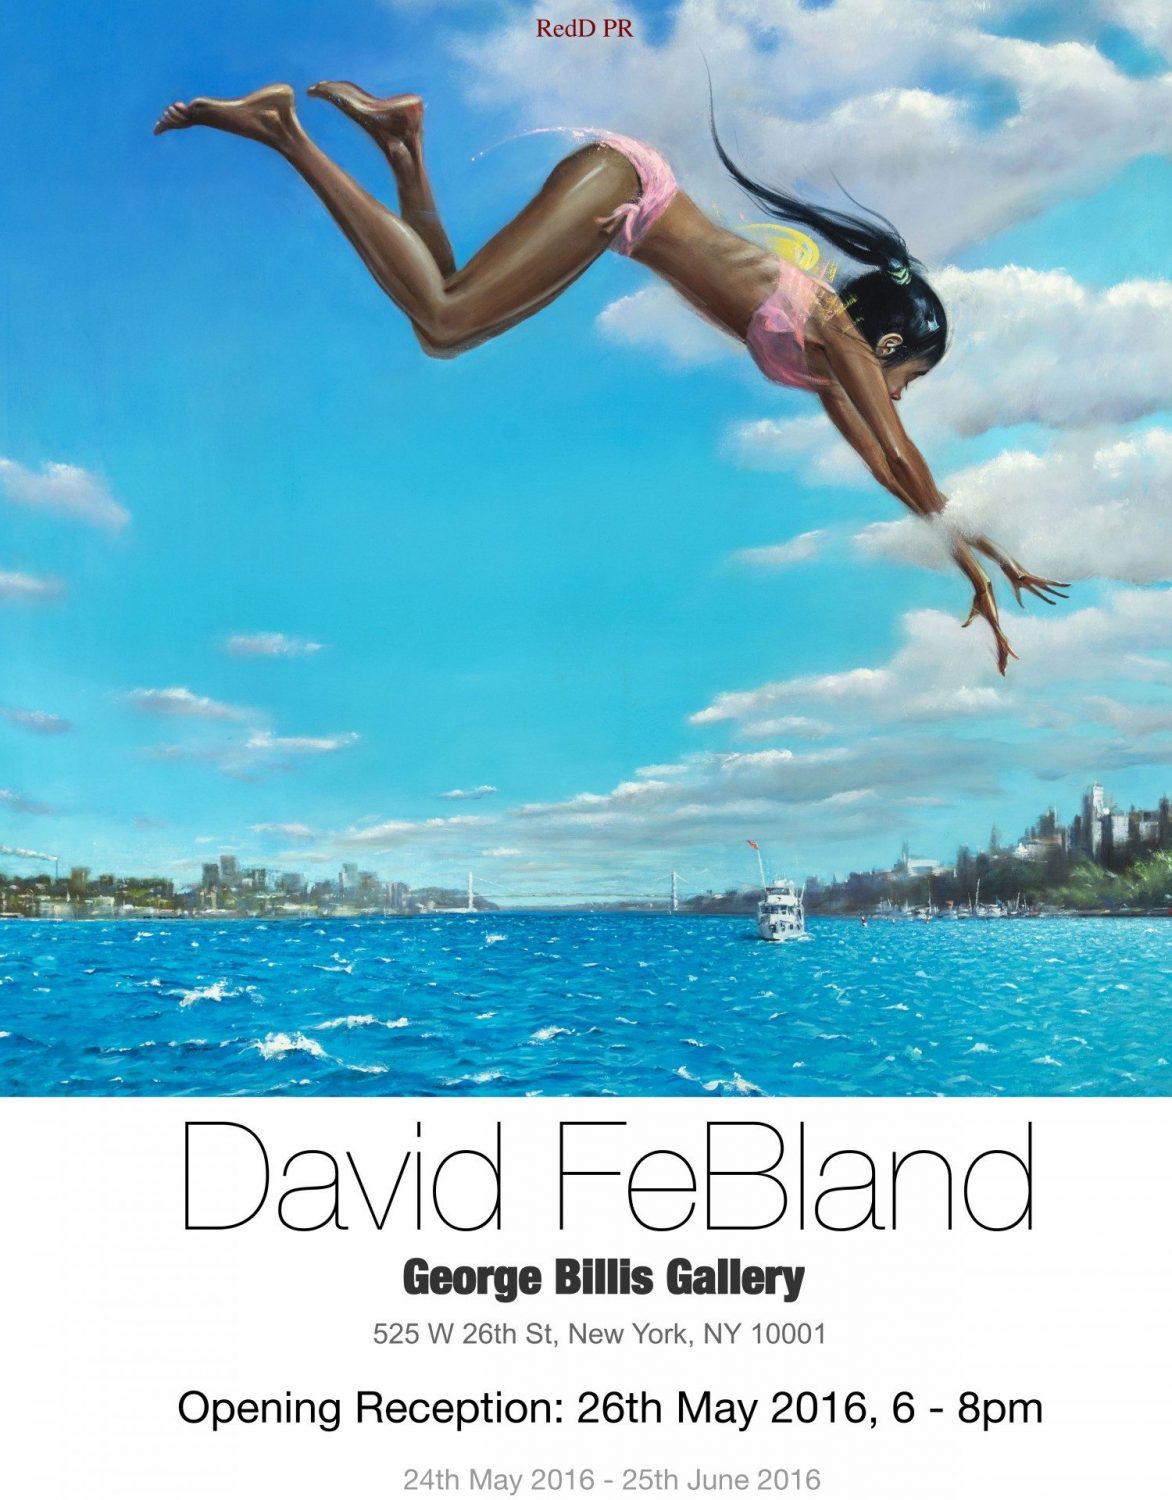 Artist David FeBland To Be Featured At The George Billis Gallery Through Jun. 25